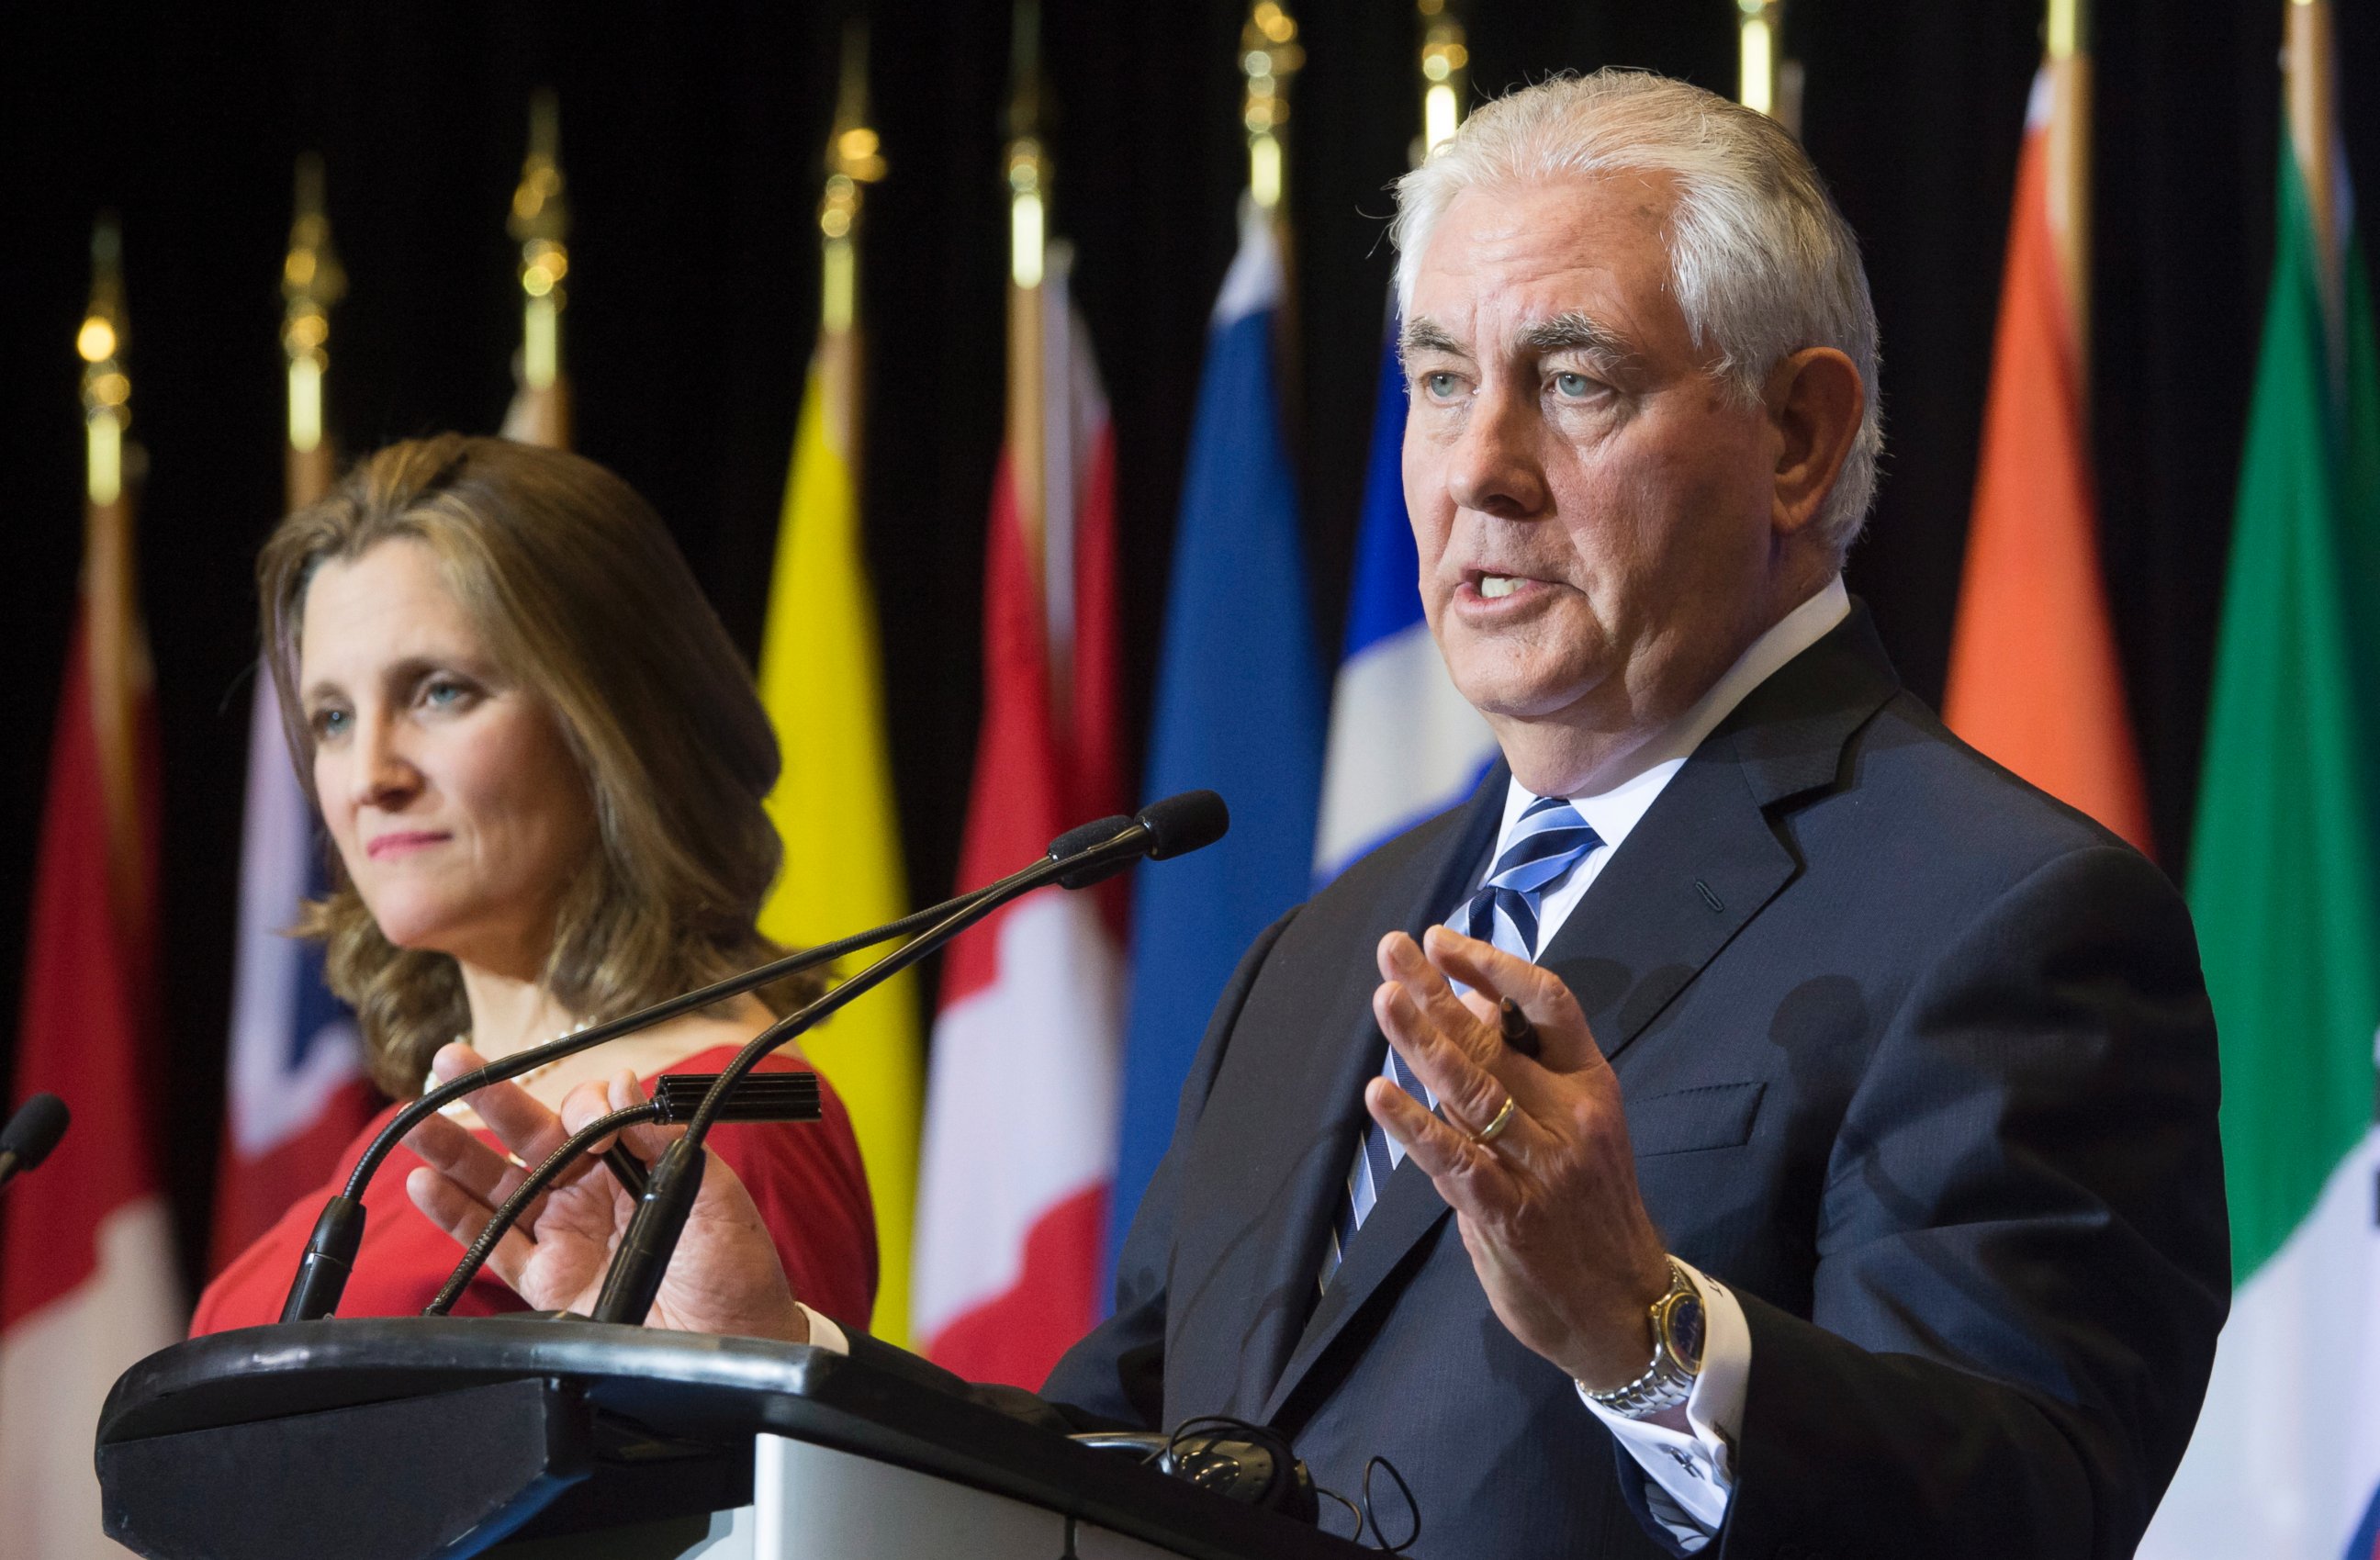 Minister of Foreign Affairs, Chrystia Freeland and Secretary of State of the United States, Rex Tillerson address a news conference following a meeting on the Security and Stability on the Korean Peninsula in Vancouver, British Columbia, Jan. 16, 2018.